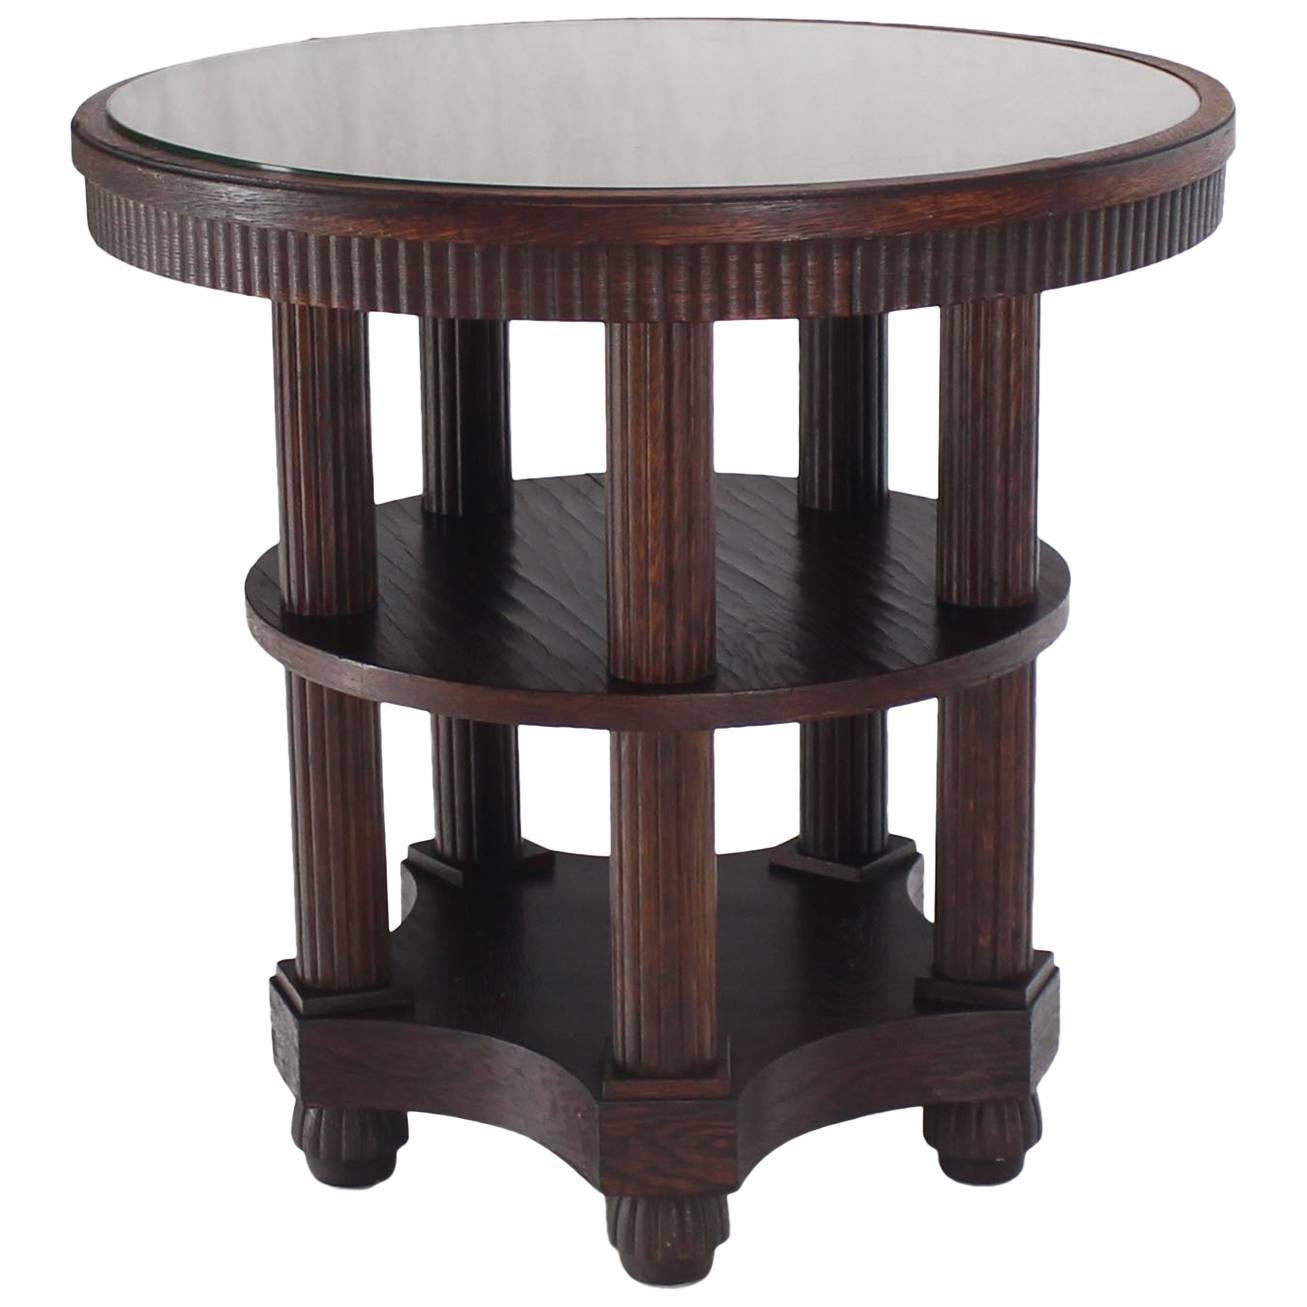 Fluted Legs Round Center Pedestal Gueridon Table Art Deco Arts and Crafts Oak  For Sale